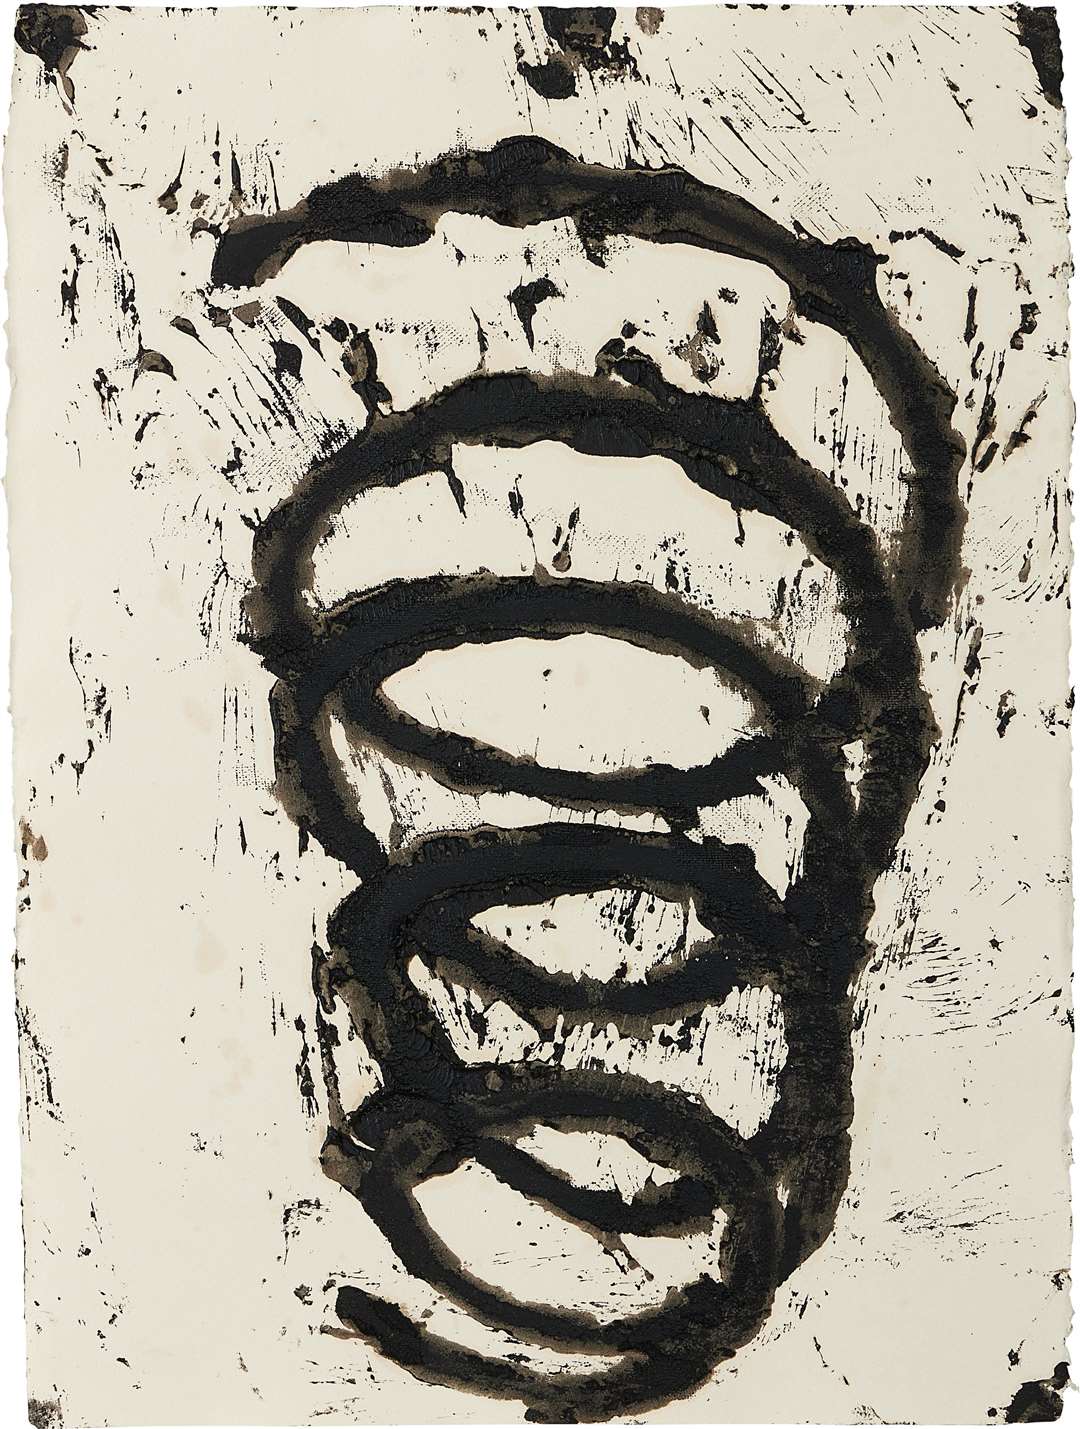 Richard Serra’s Rotation #9 which is estimated at between 200,000 to 300,000 dollars (£170,000 to 260,000) also features in the selection (Sotheby’s/PA)